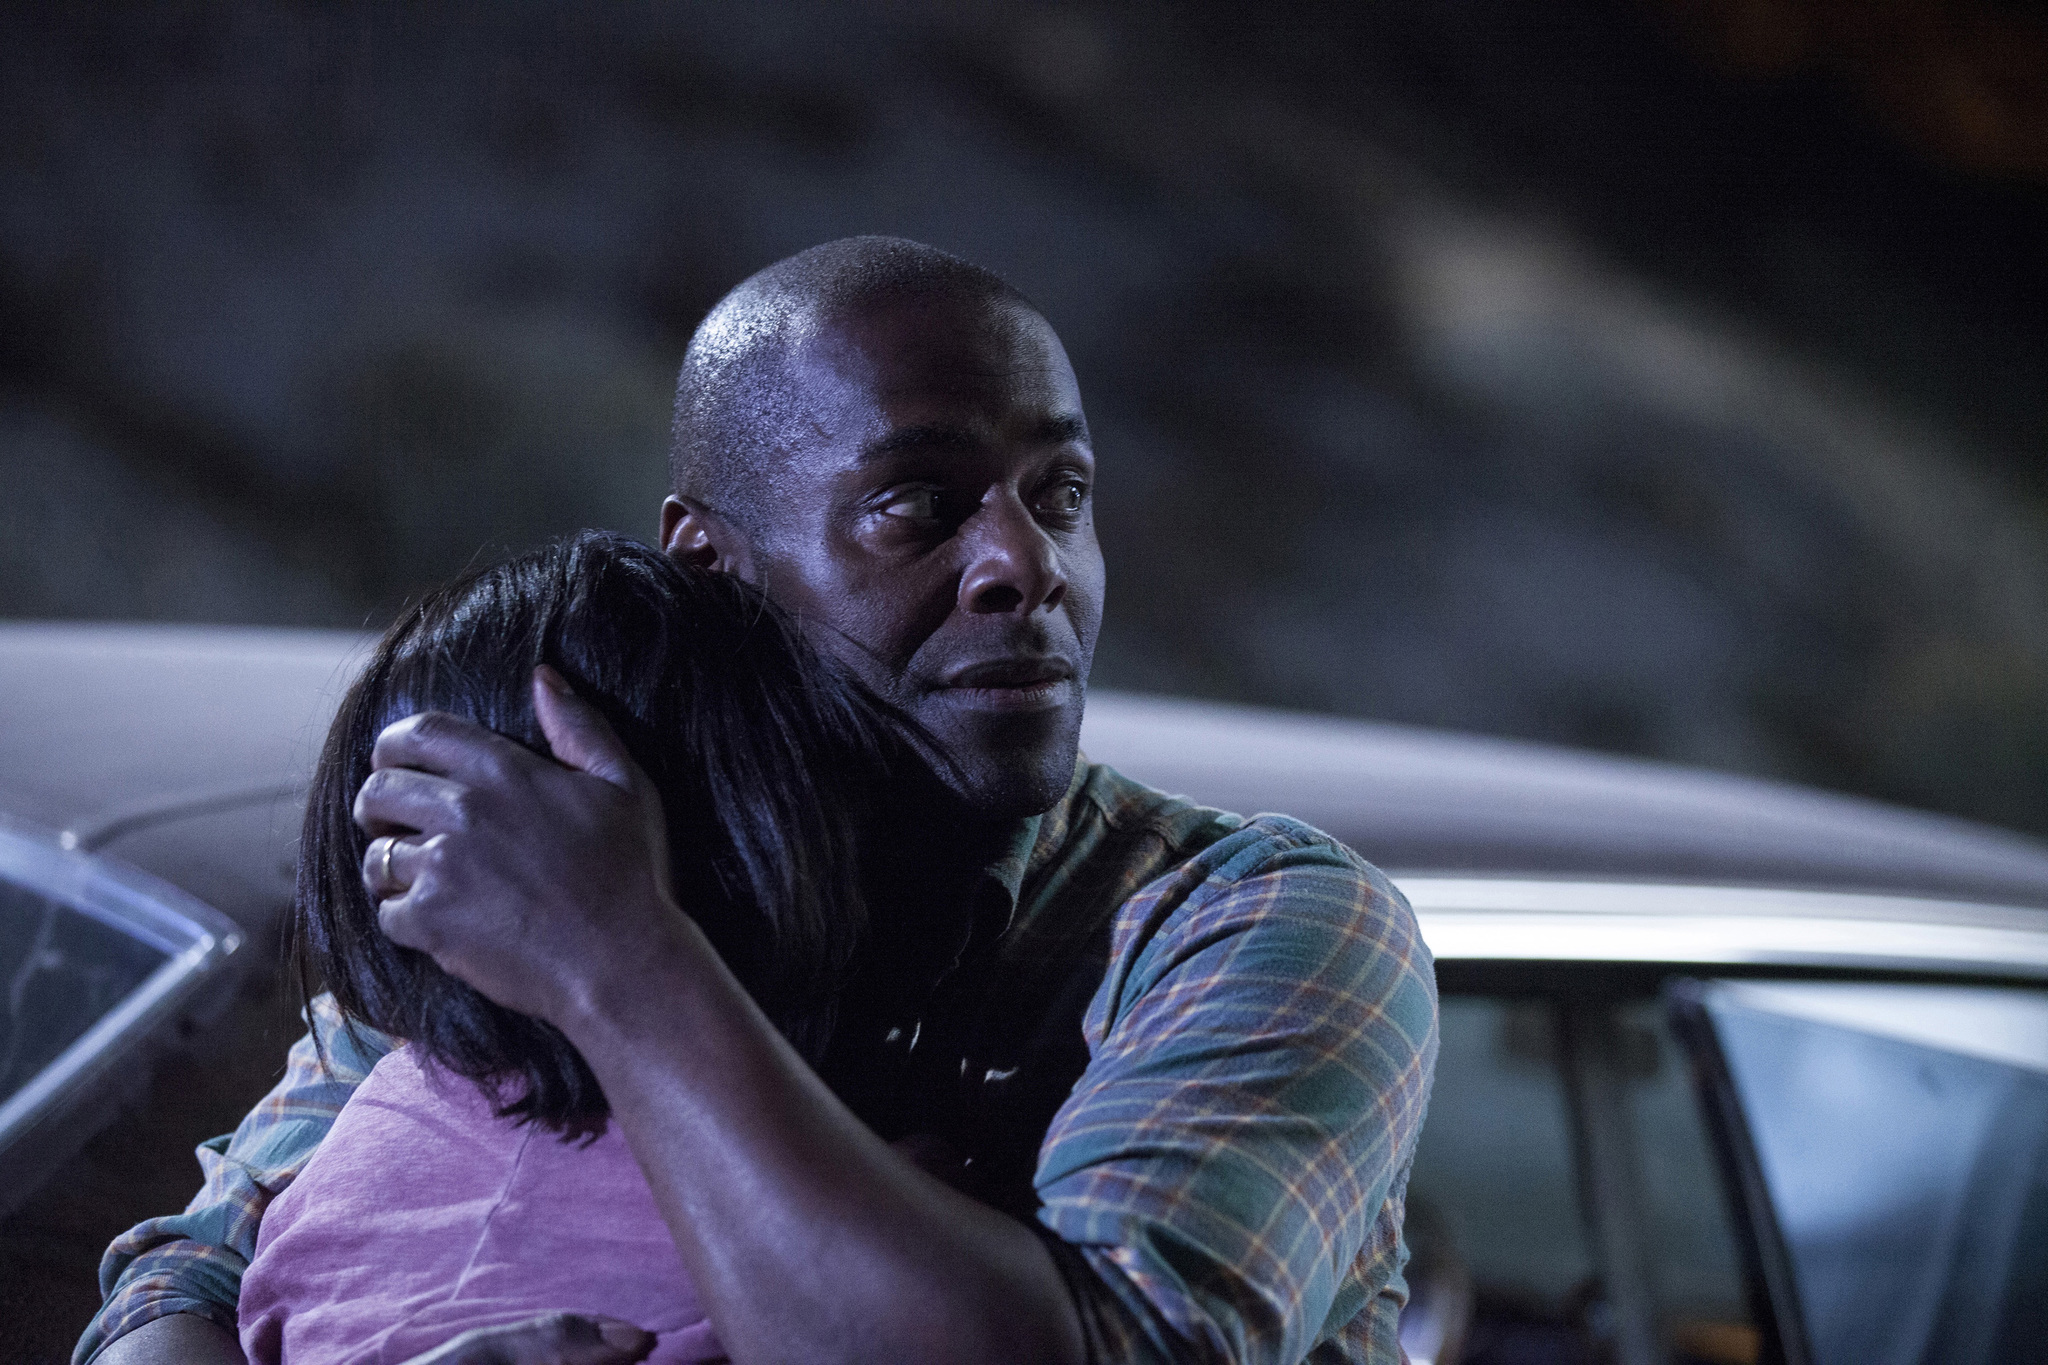 Still of Paterson Joseph and Annie Q. in The Leftovers (2014)